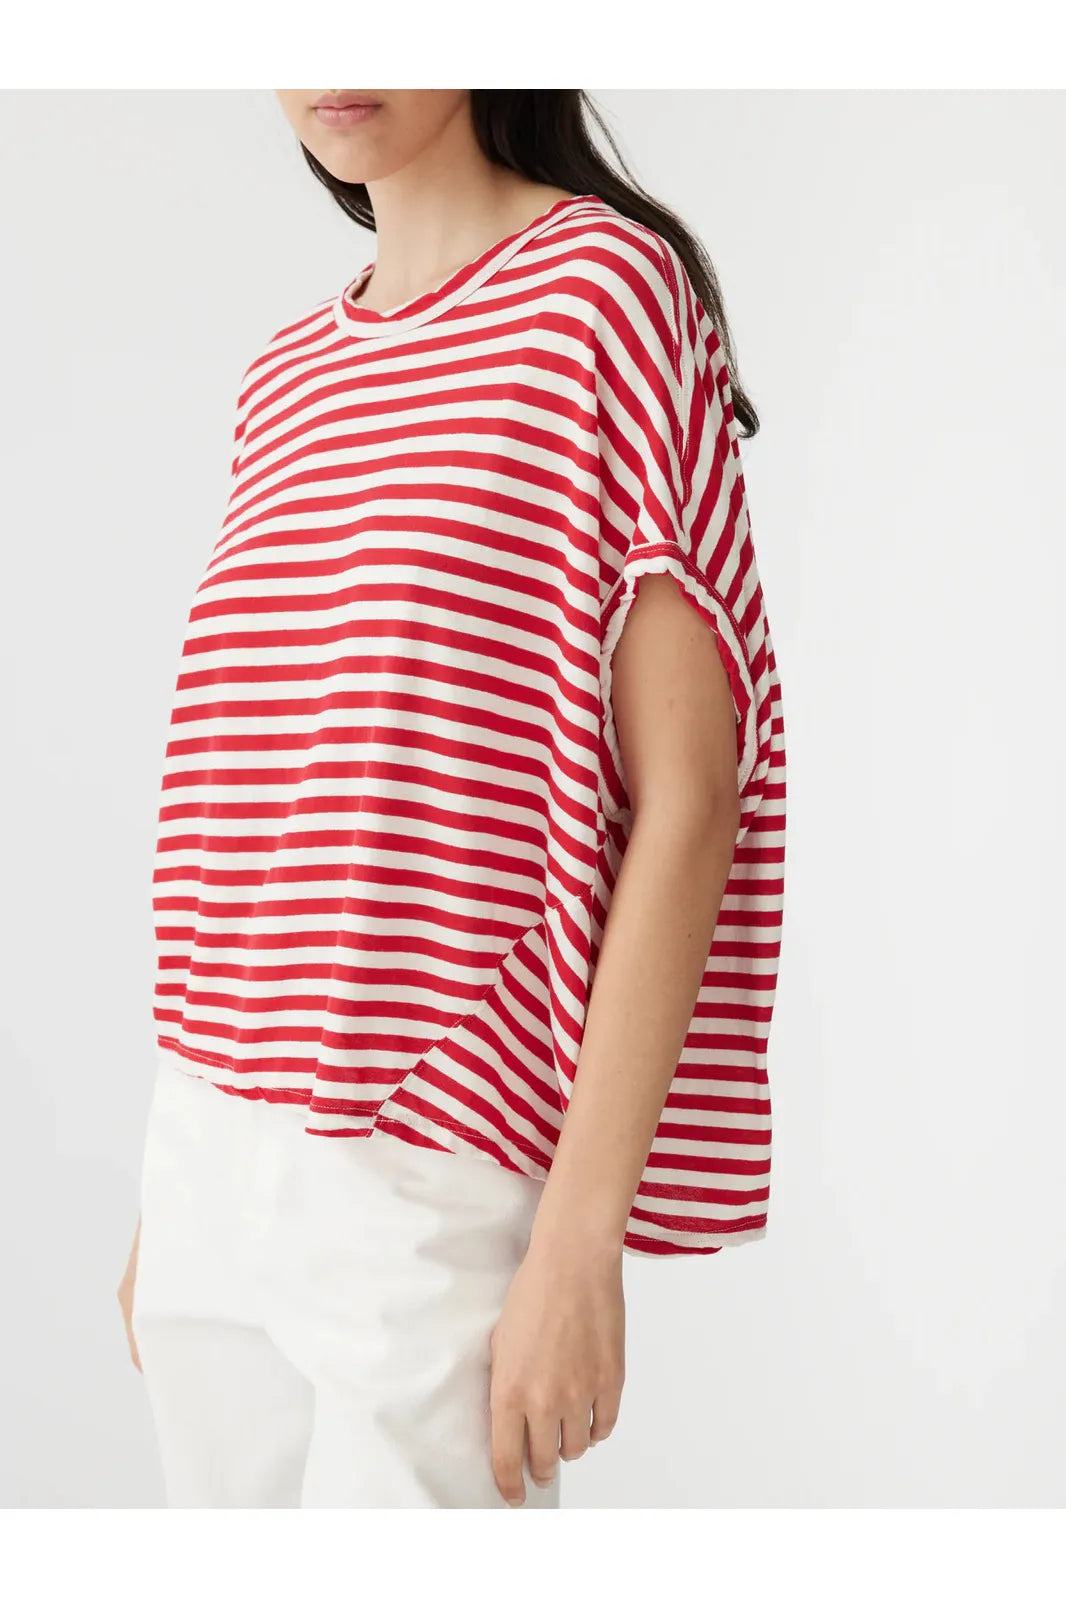 Stripe Slouch Circle Tank in Red/ Undyed by Bassike